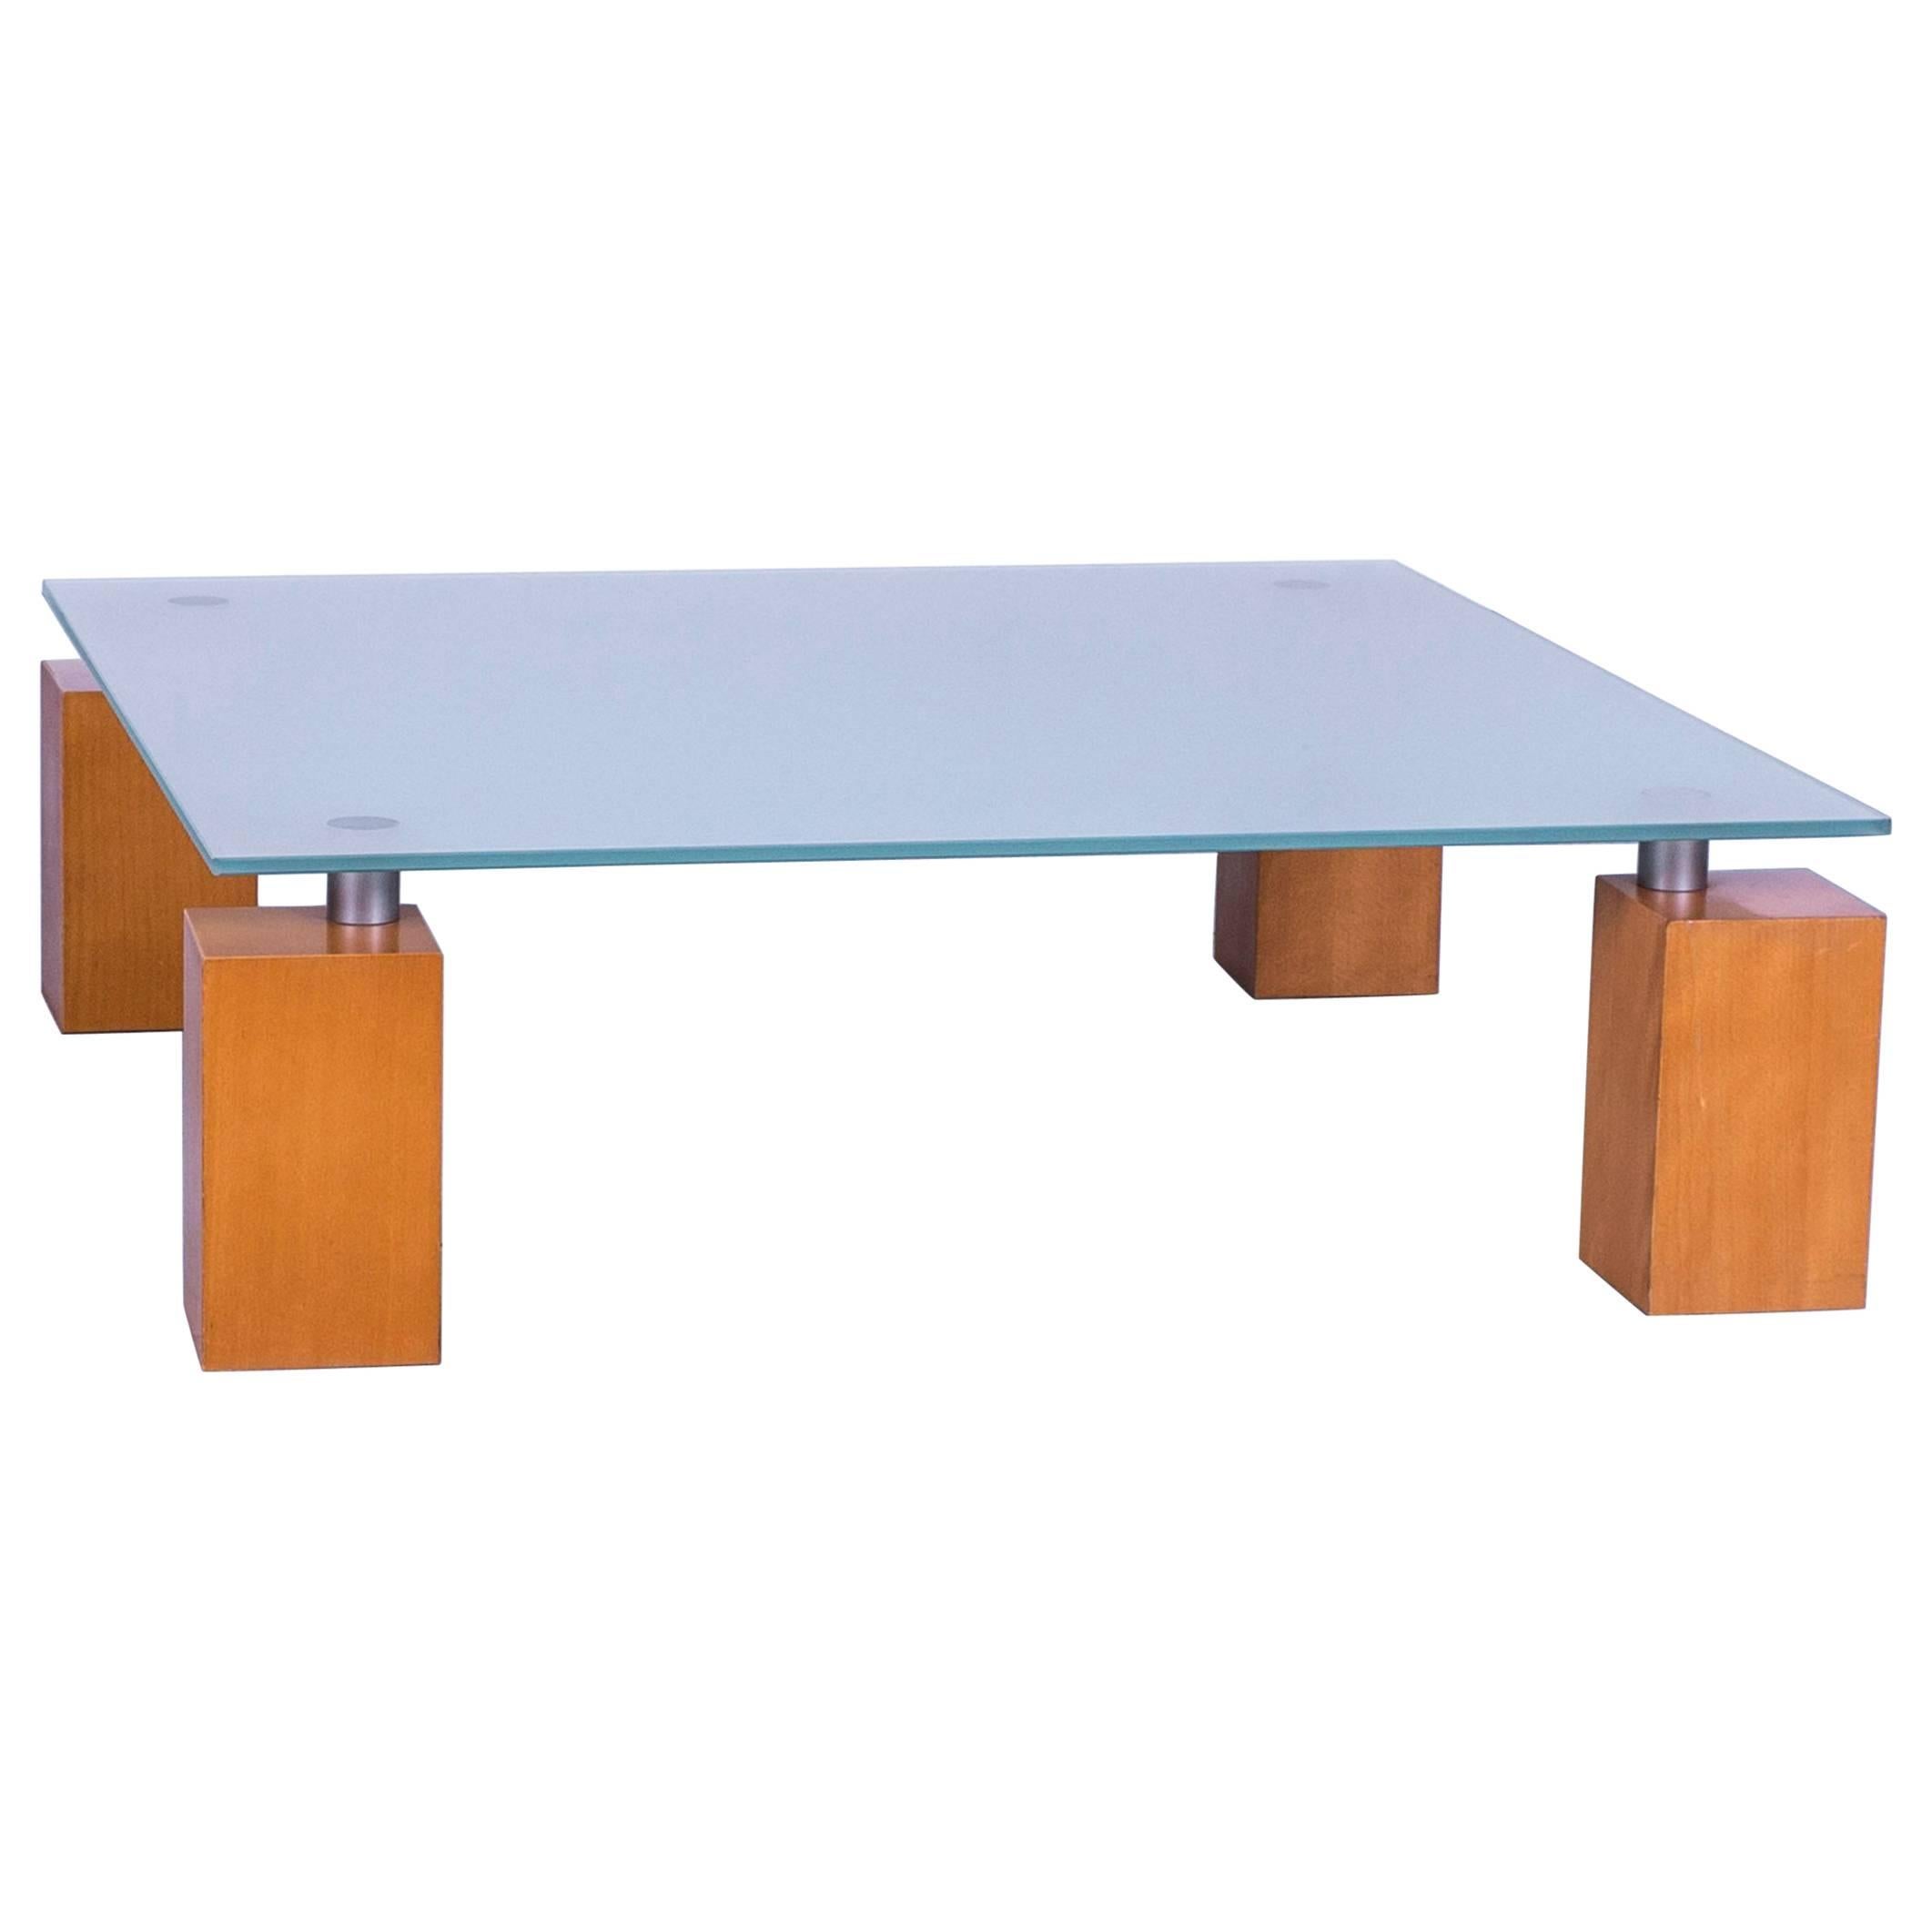 Ligne Roset Squadra Coffee Table Glass Top with Wooden Feed Square